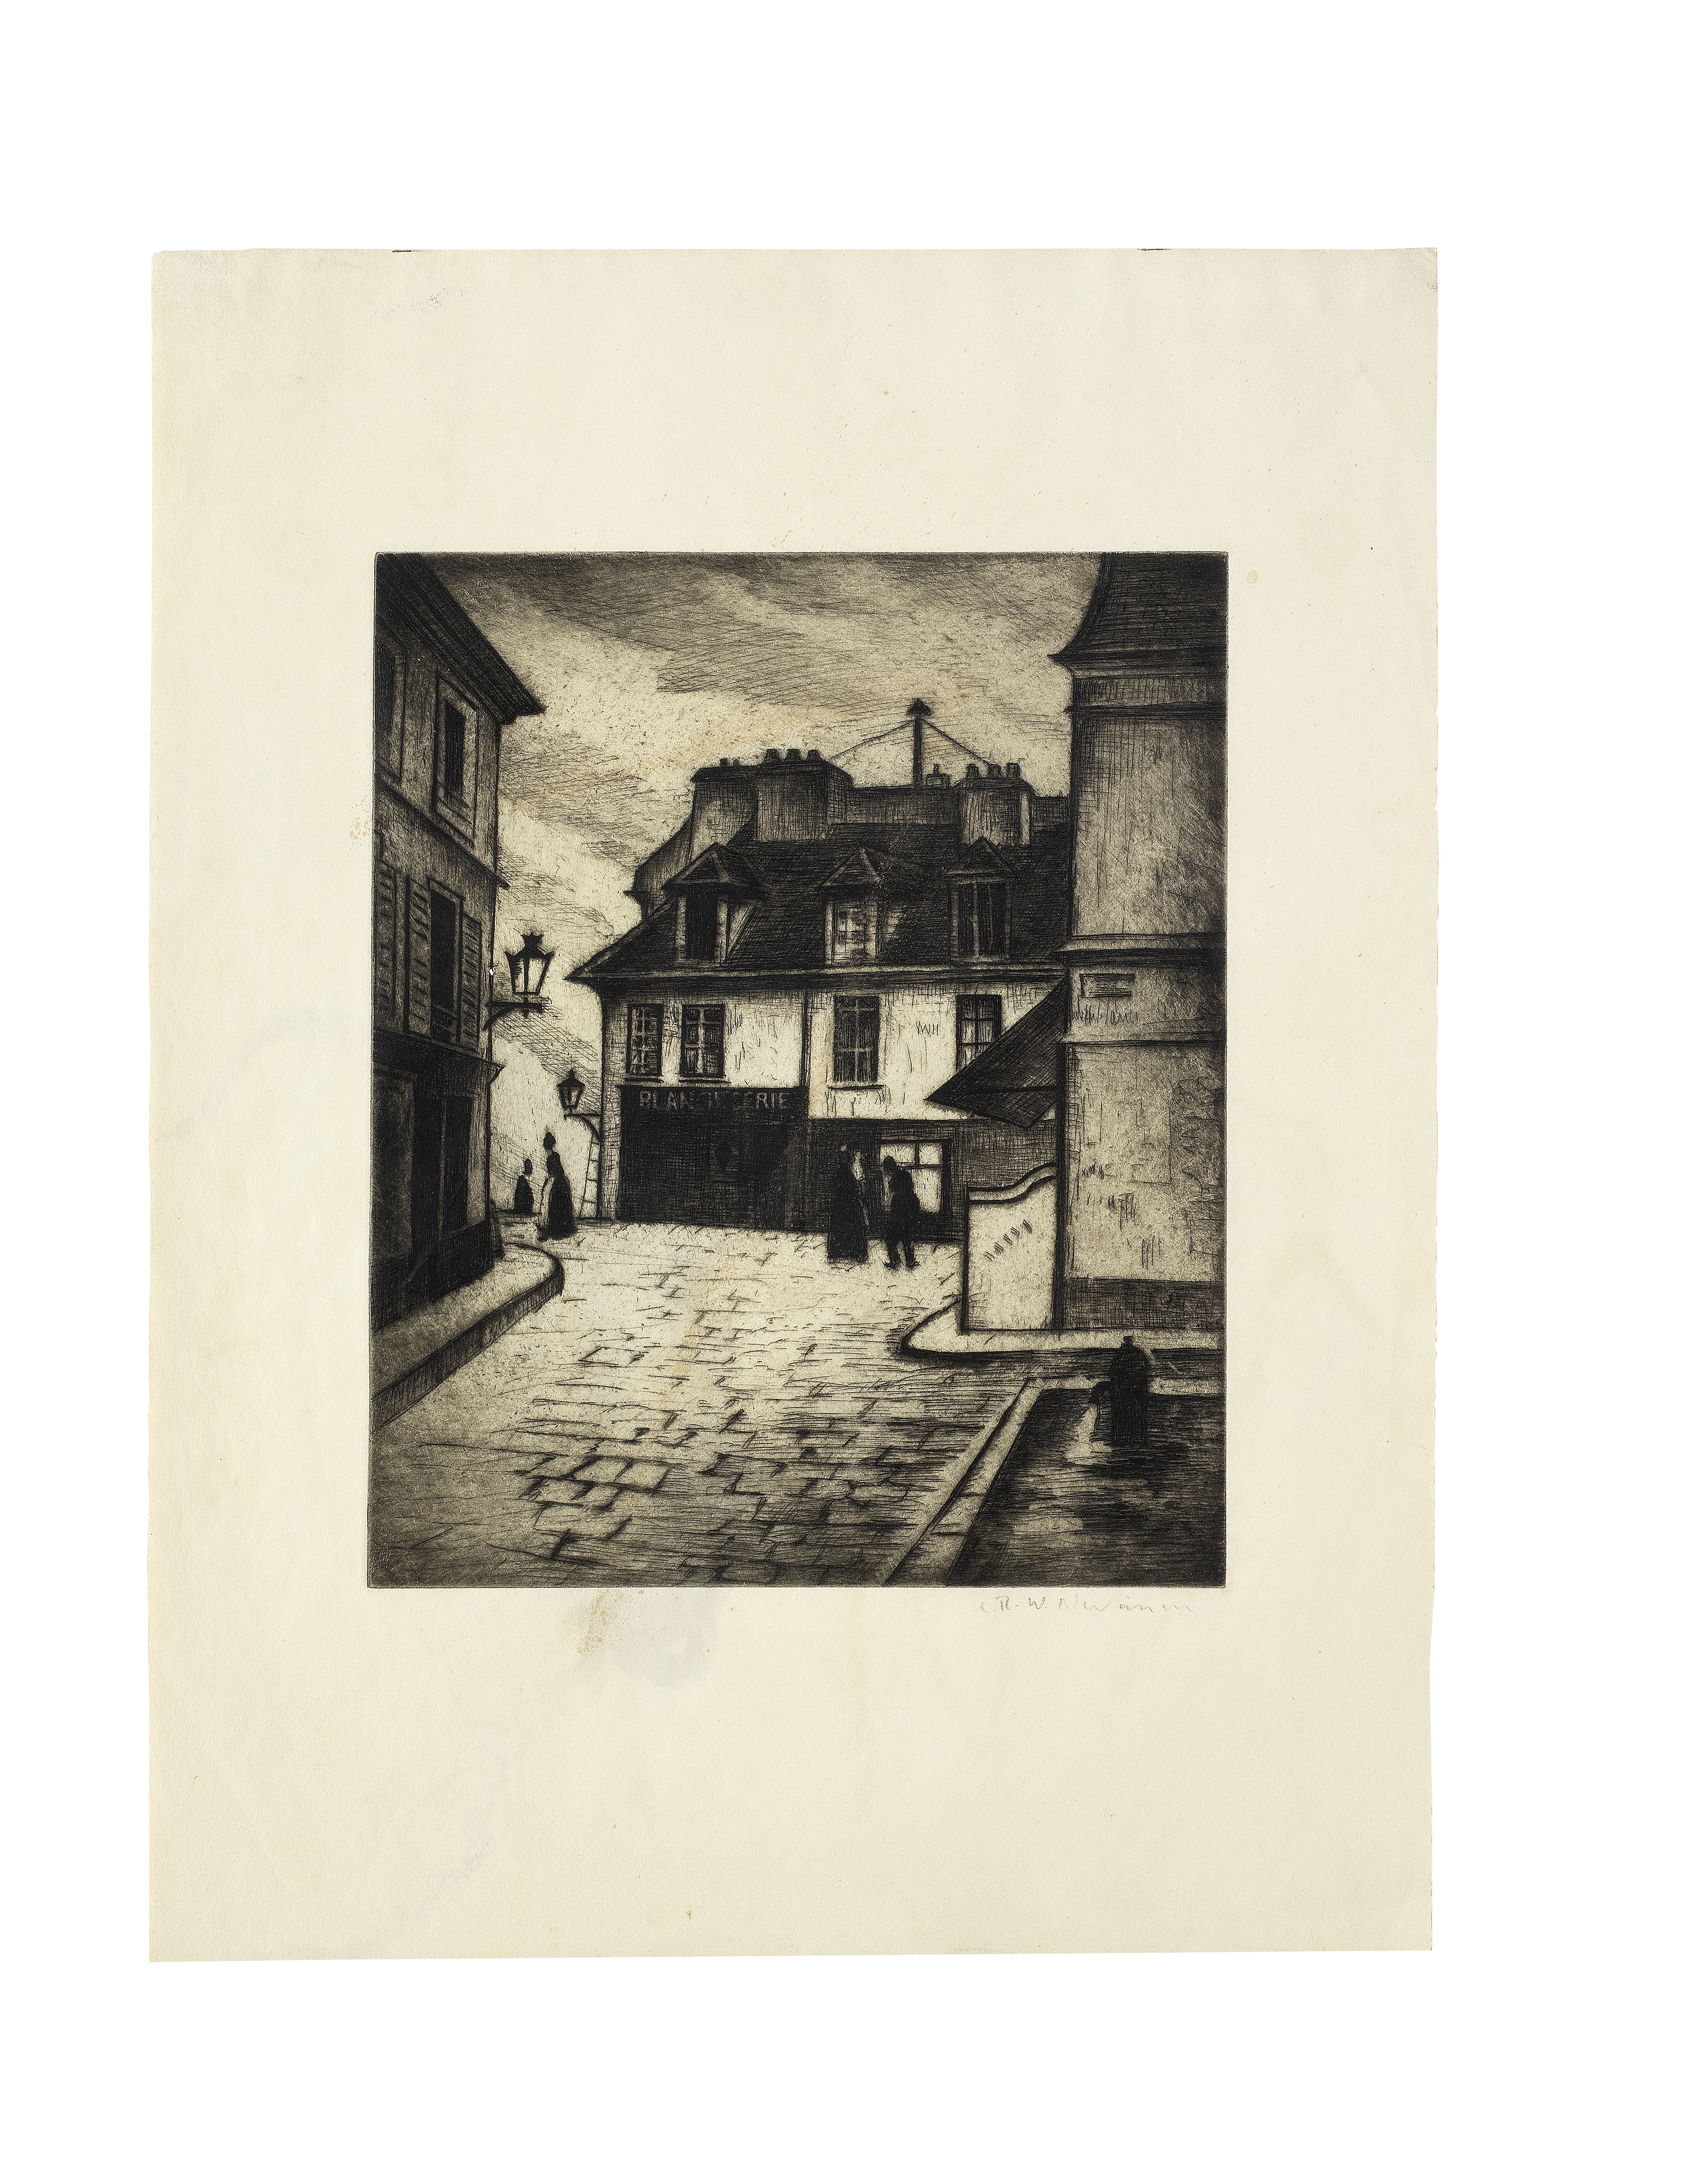 Christopher Richard Wynne Nevinson A.R.A (1889-1946) La Butte Montmartre Drypoint and aquatint, 1...